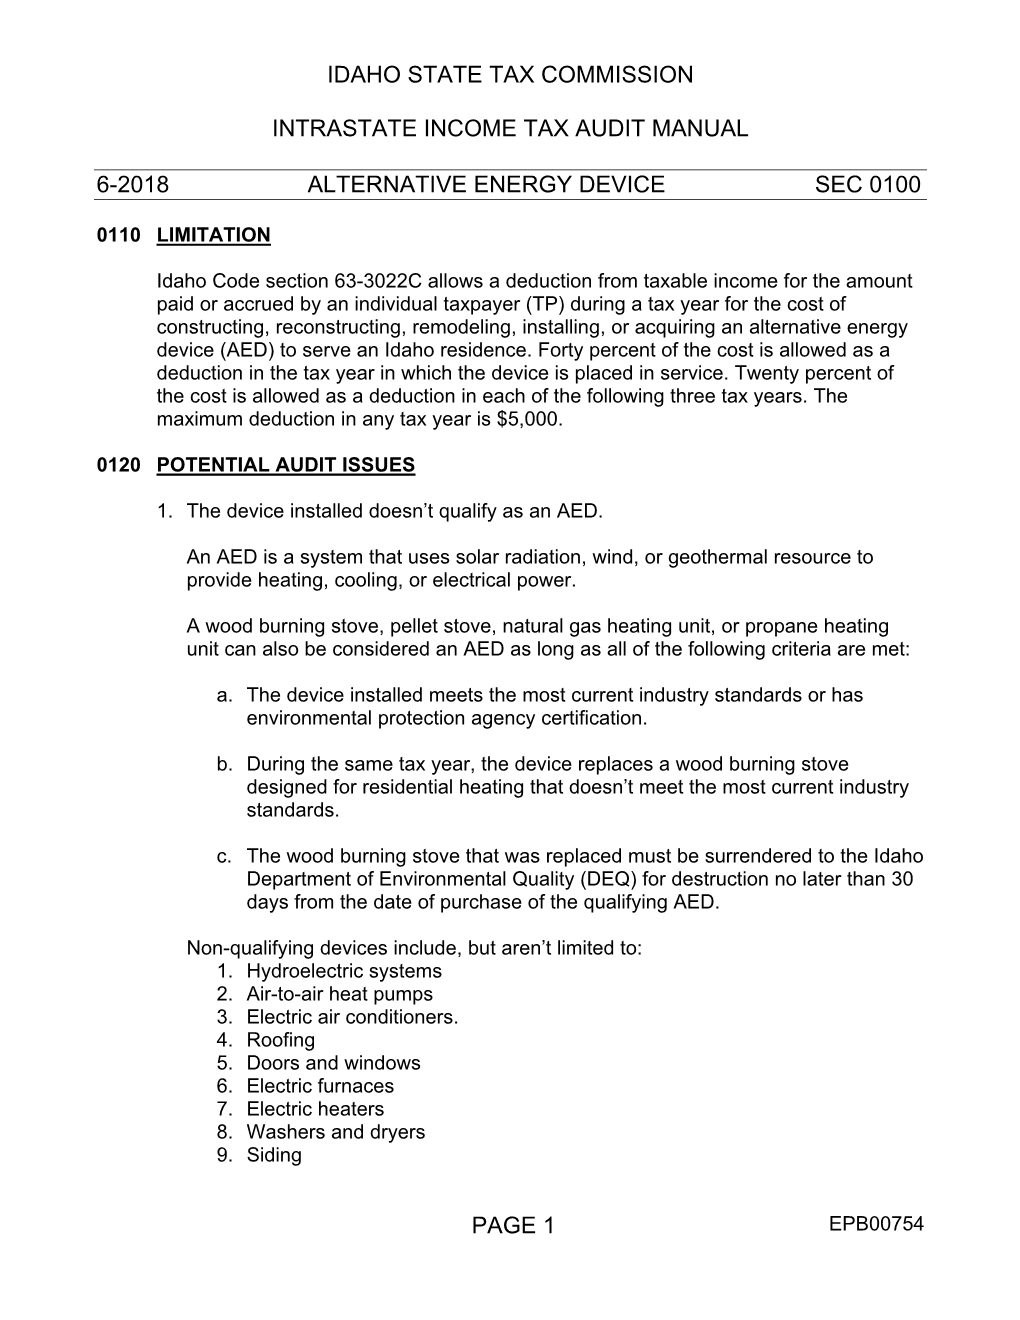 Idaho State Tax Commission Intrastate Income Tax Audit Manual 6-2018 Alternative Energy Device Sec 0100 Page 1